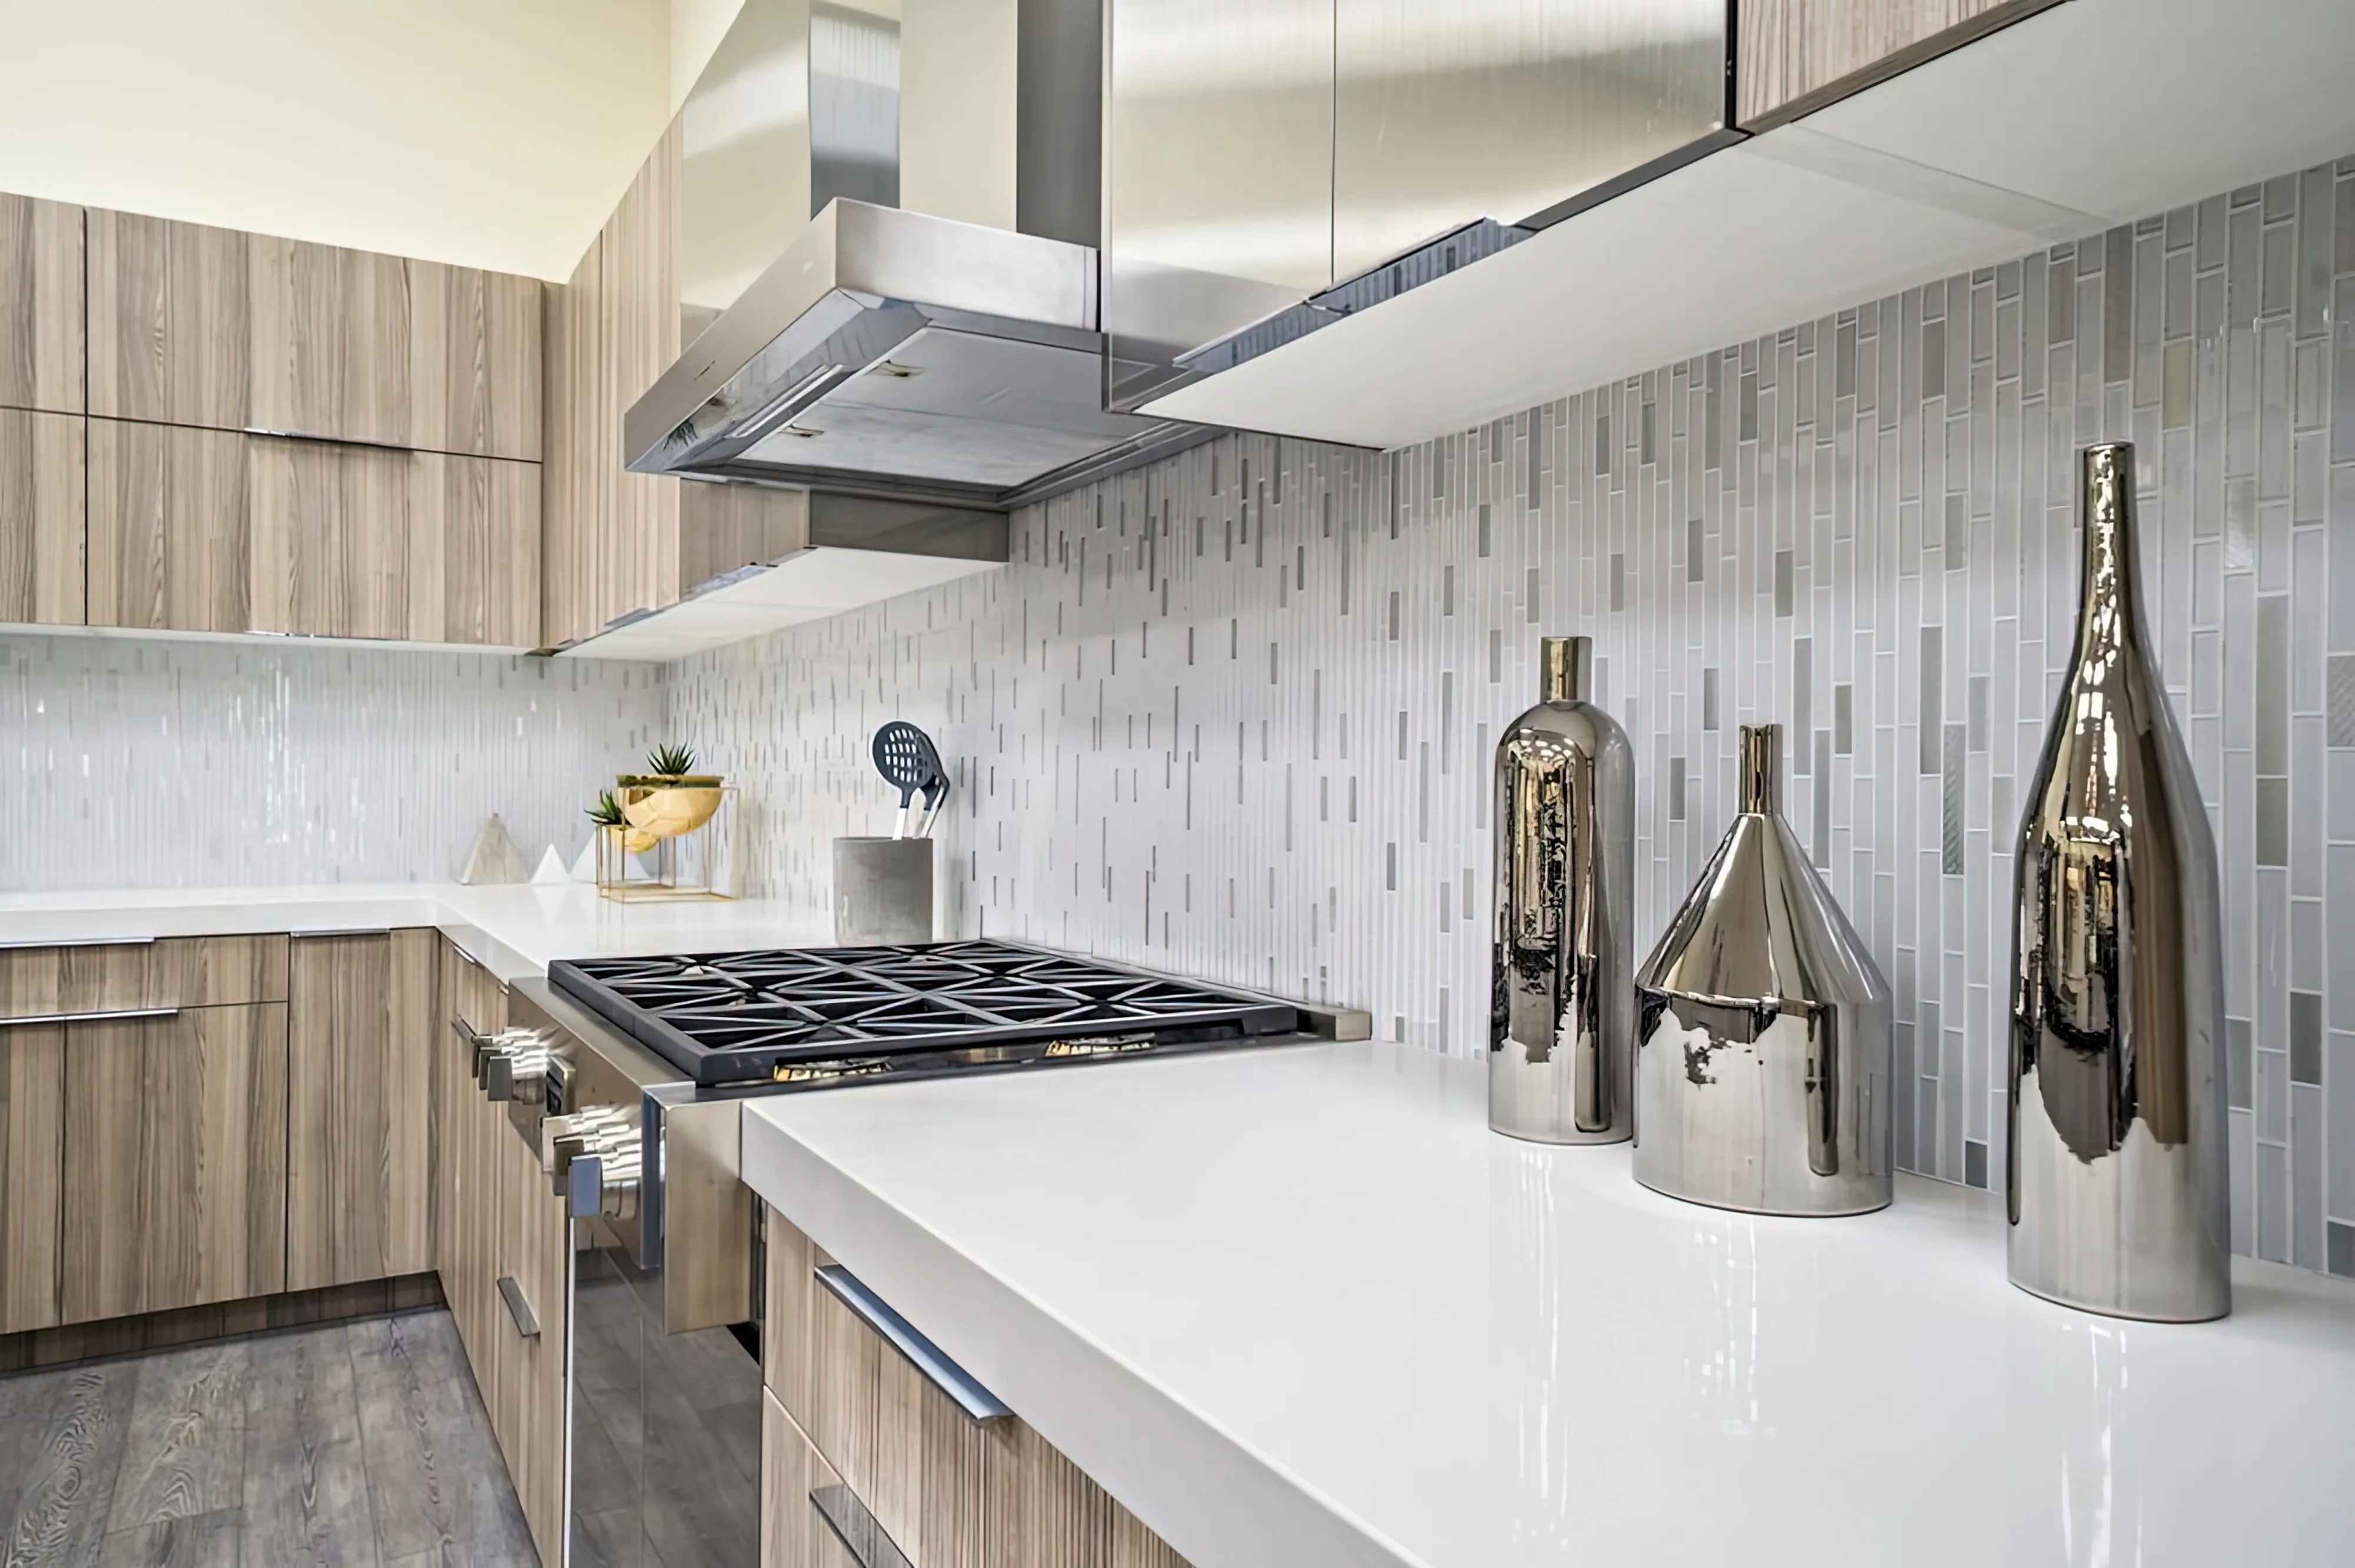 The choice between a stone slab backsplash and another type of kitchen backsplash should be based on factors such as aesthetic desire, cost, and ease of upkeep.